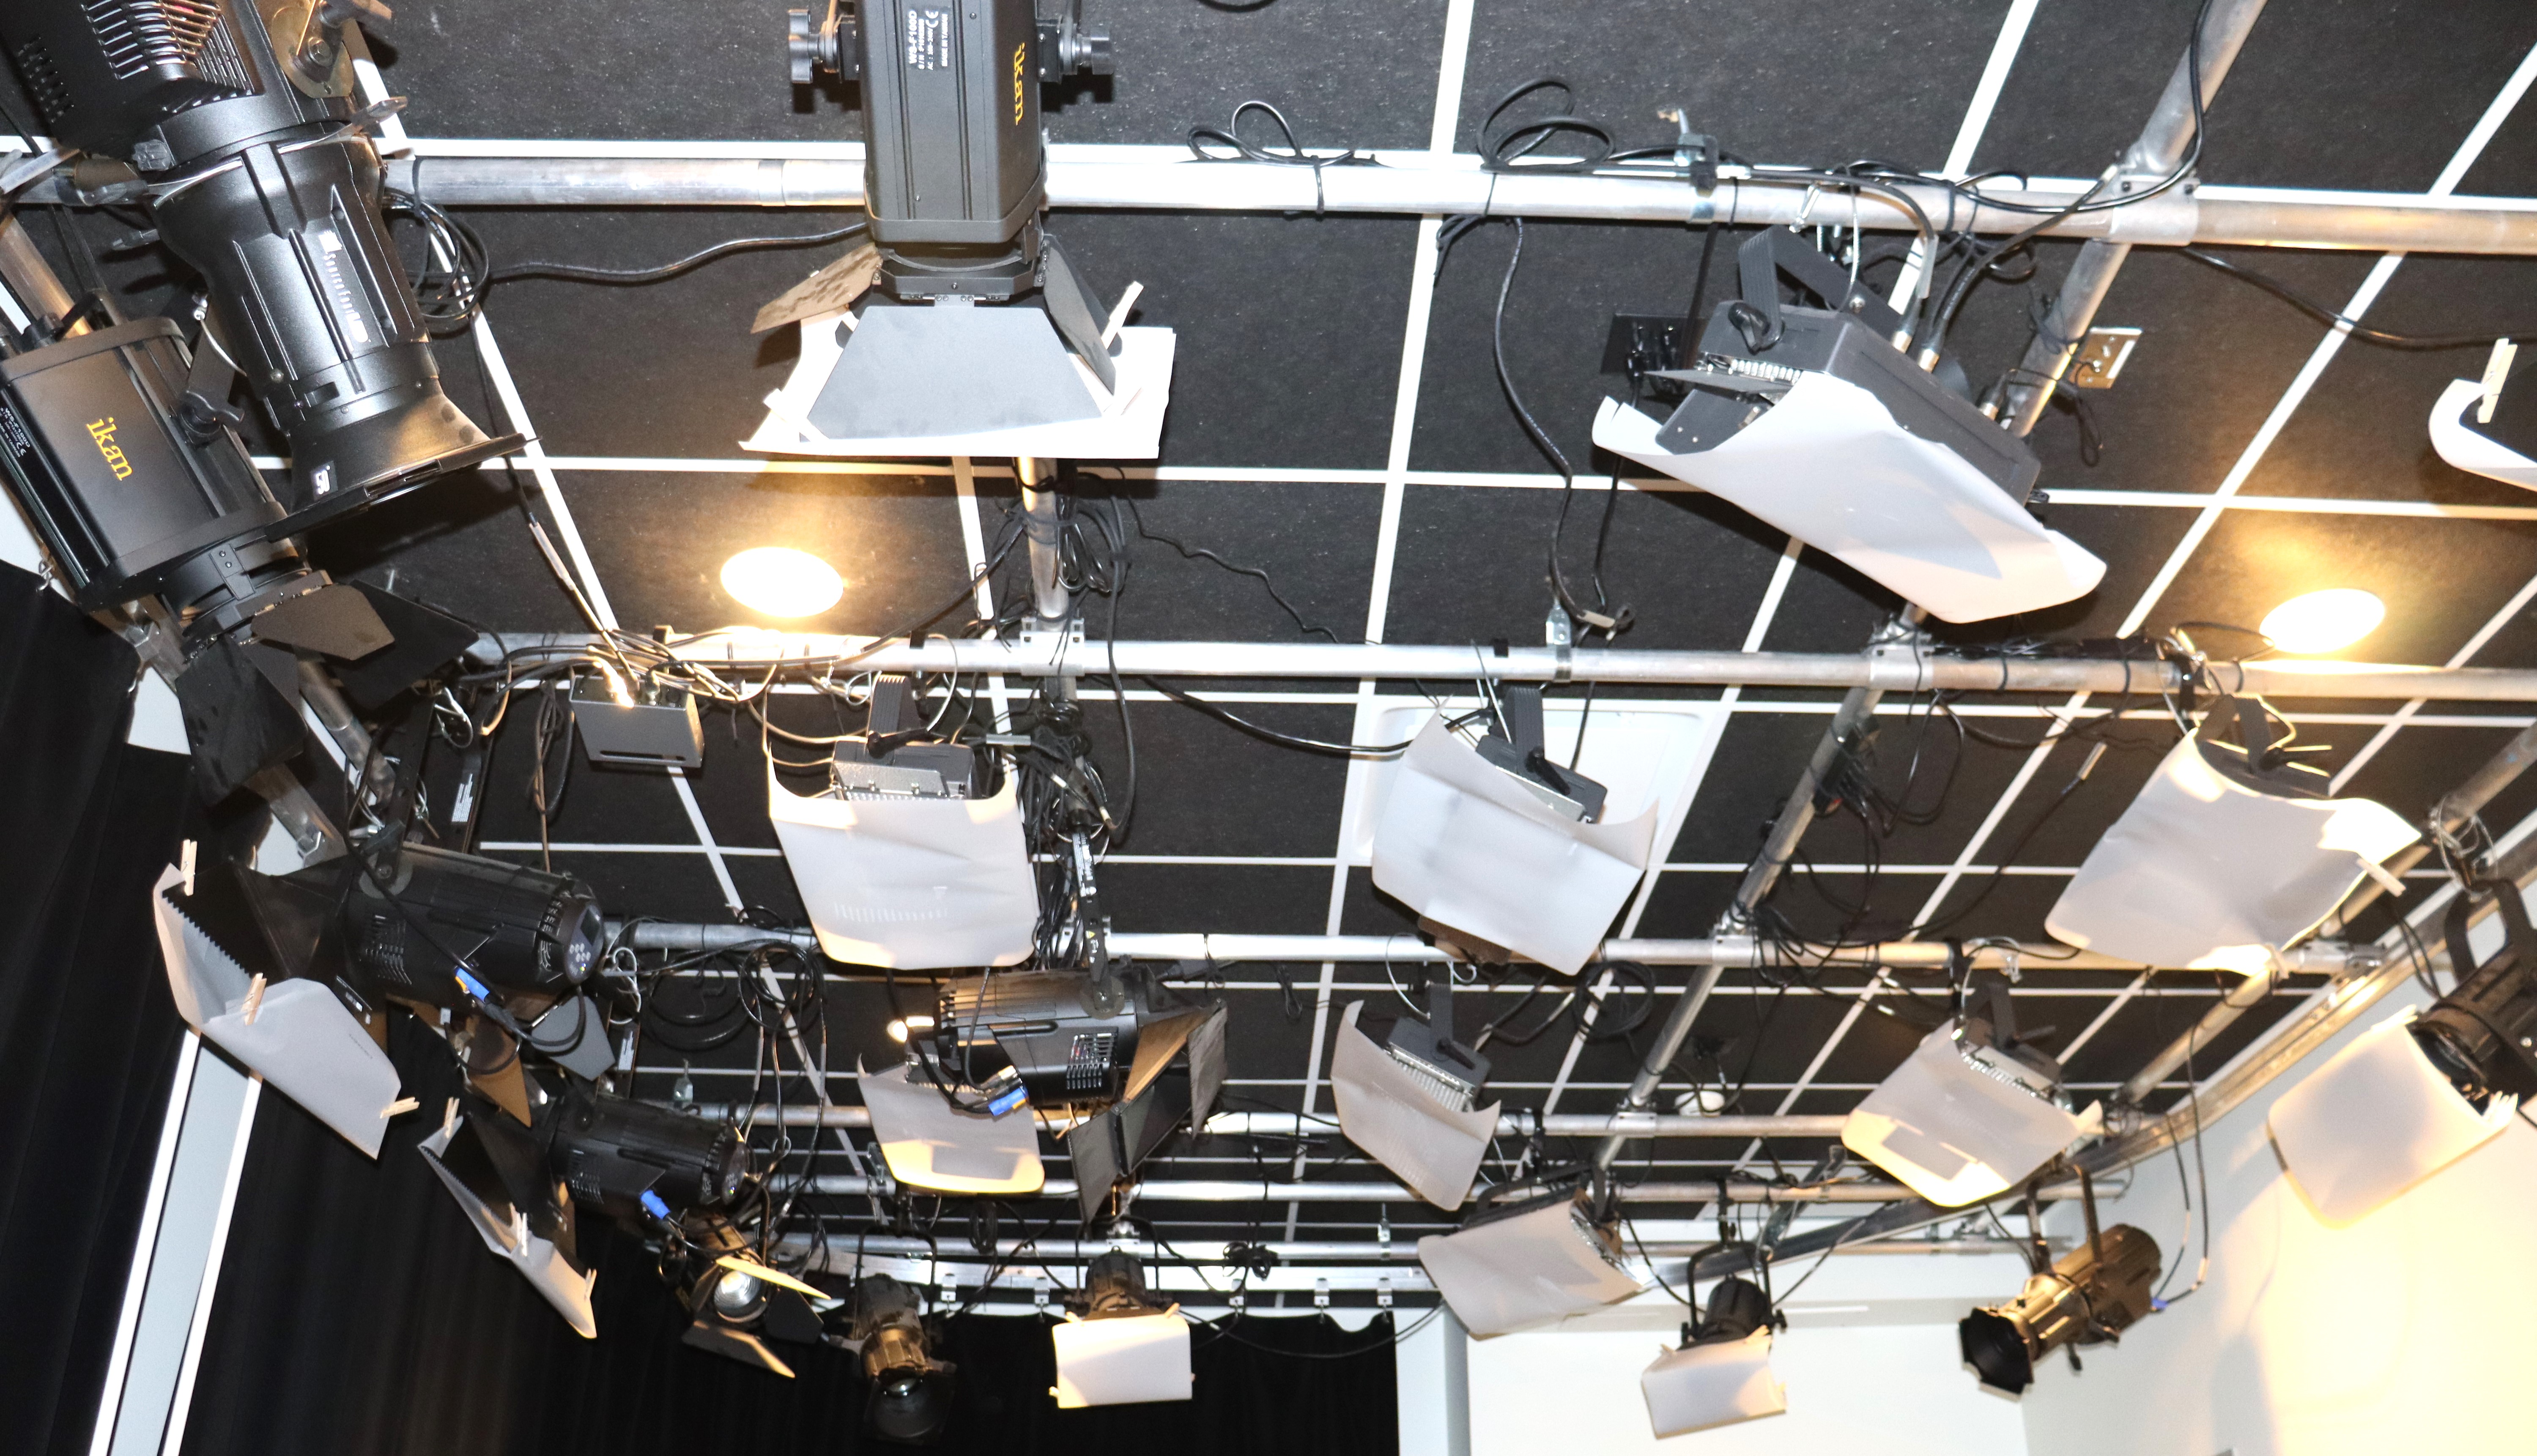 Lights and cameras installed in the ceiling of the XRAM studio